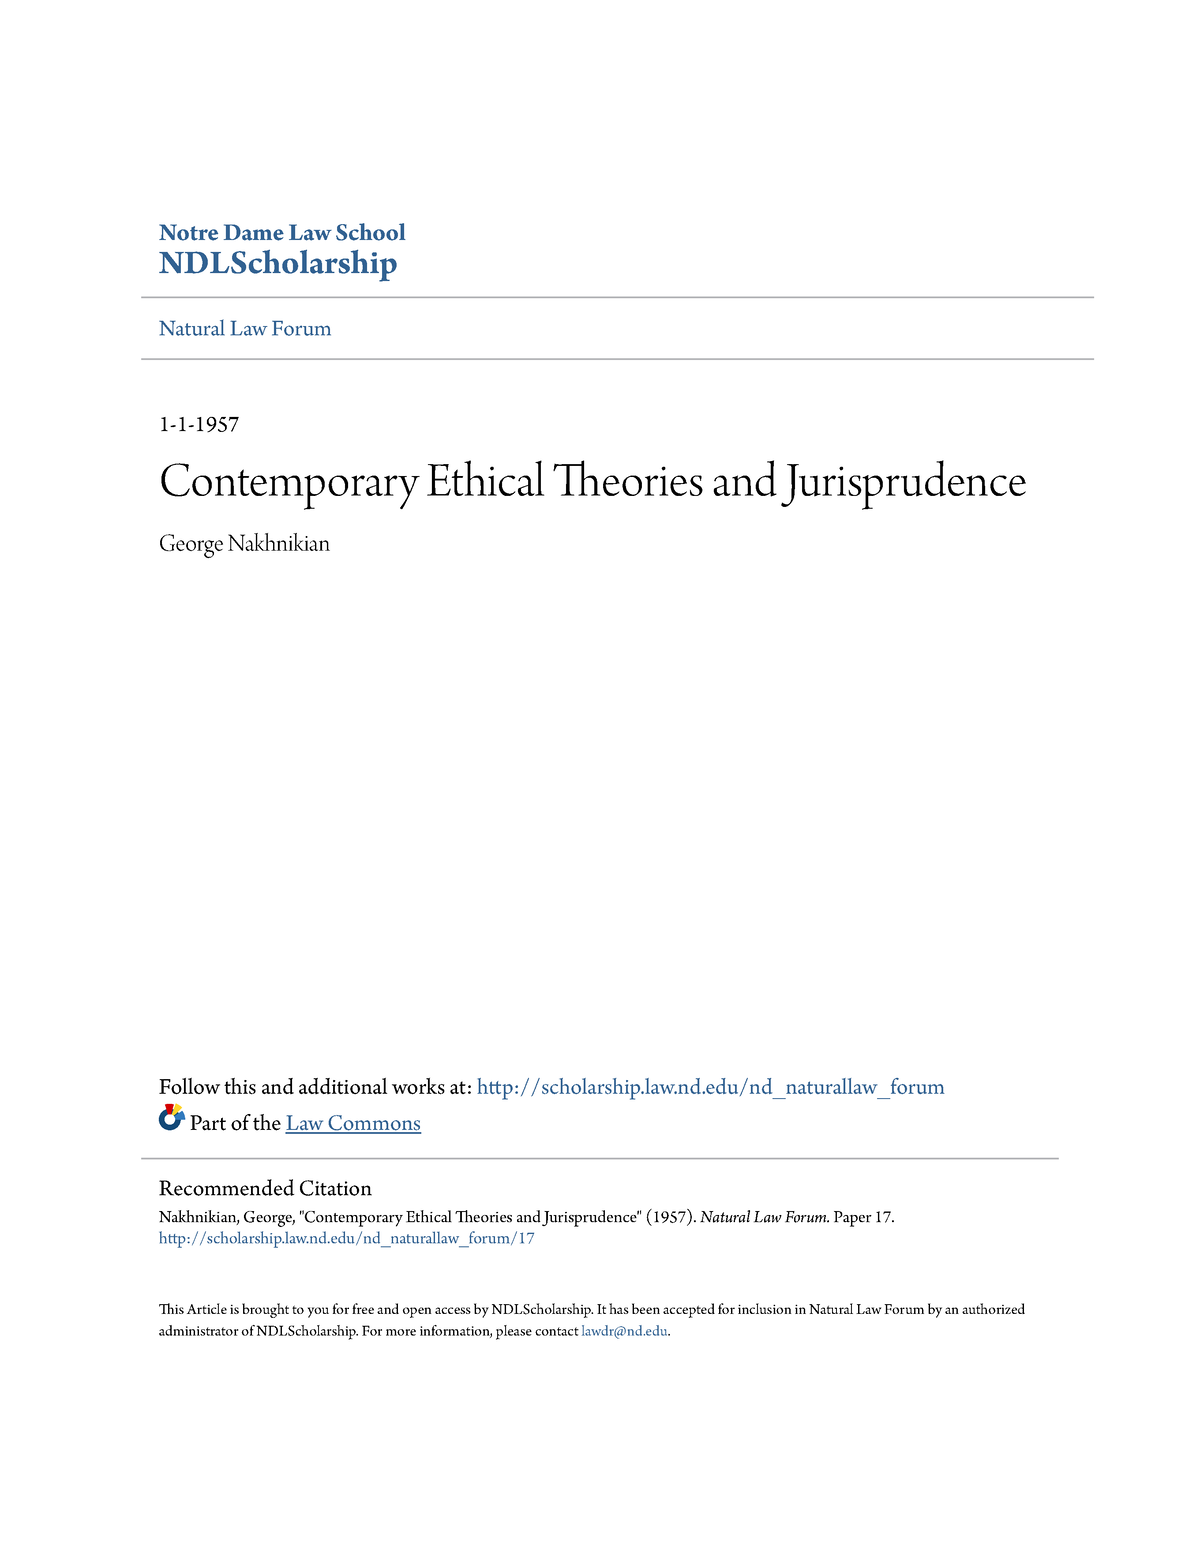 contemporary-ethical-theories-and-jurisprudence-notre-dame-law-school